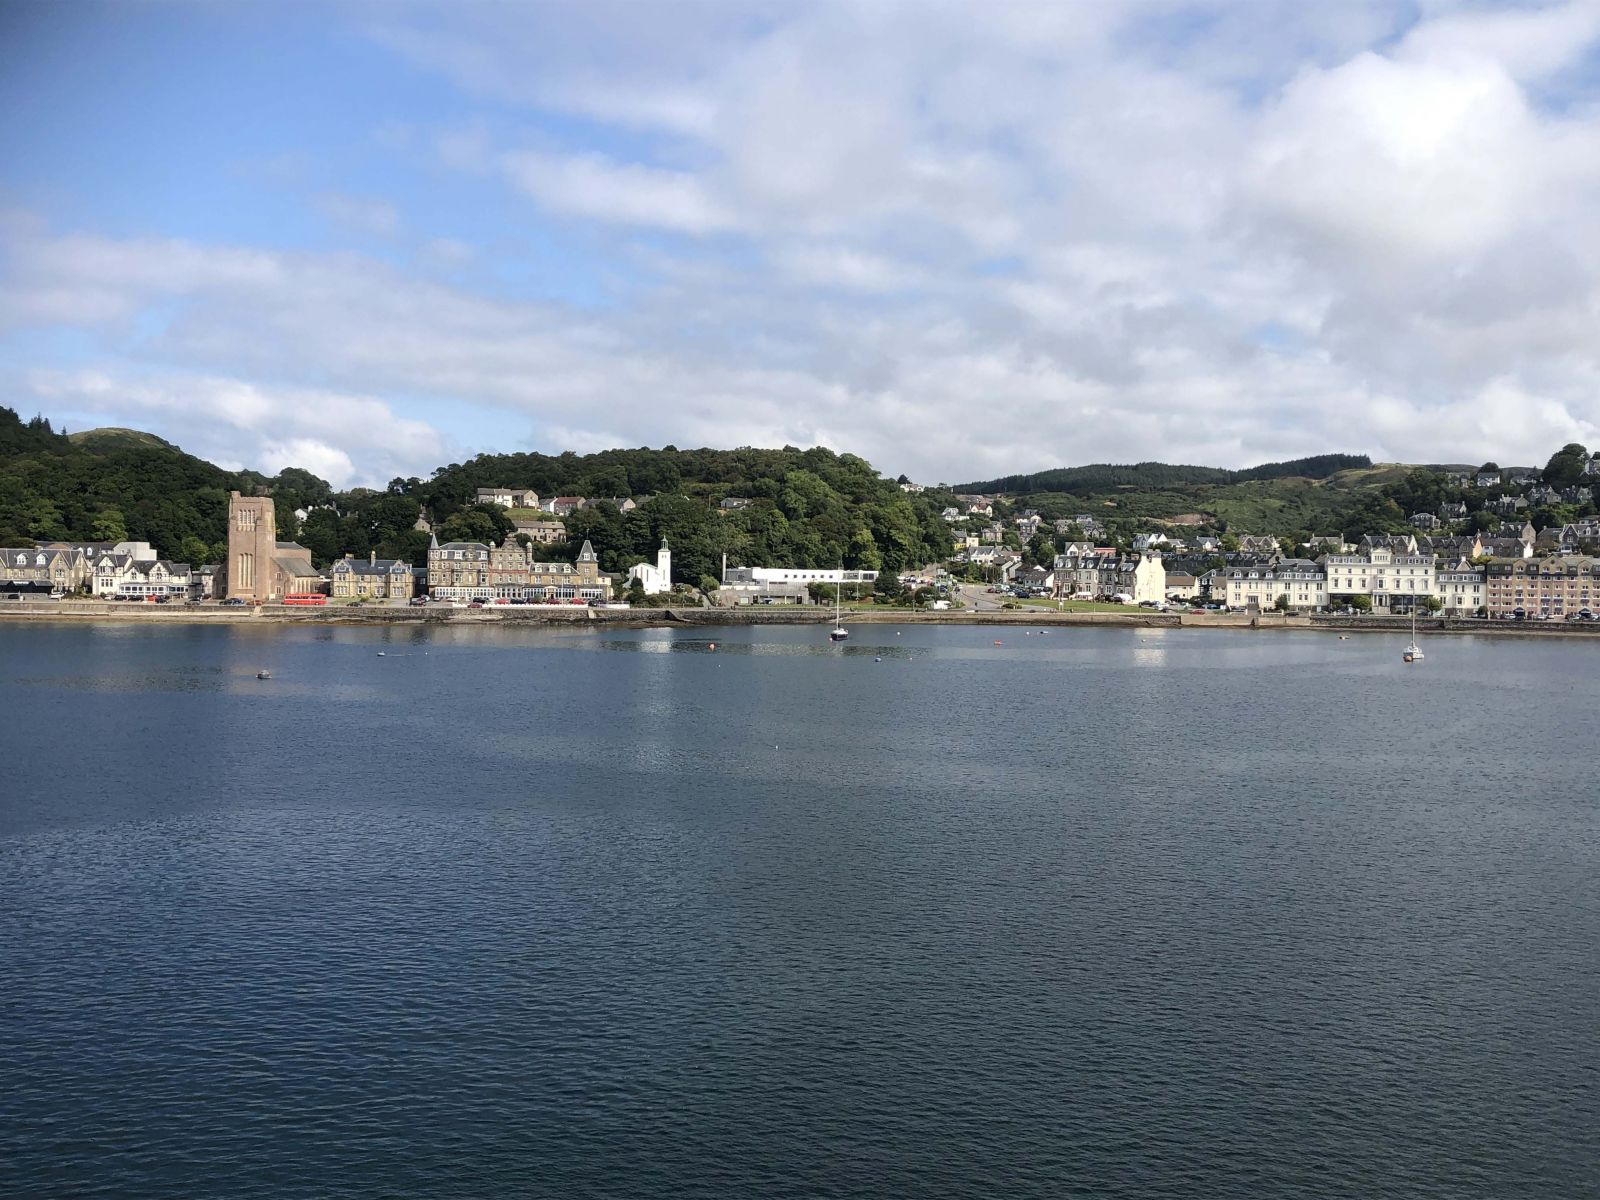 Sailing out of Oban